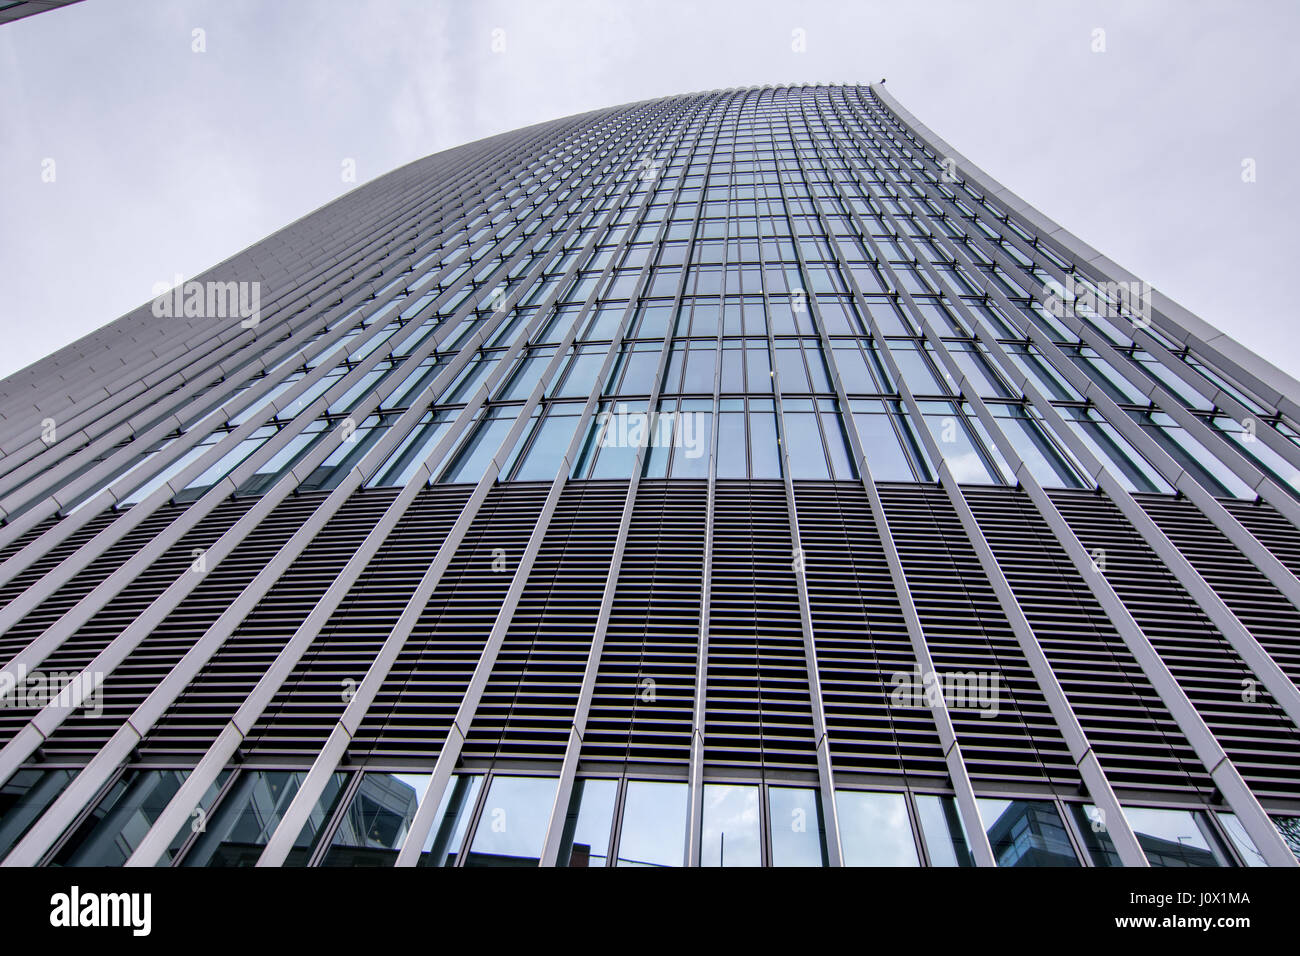 London, UK - March 29, 2017: The skyscraper at 20 Fenchurch street known as the Walkie Talkie building in the City of London on a cloudy day Stock Photo